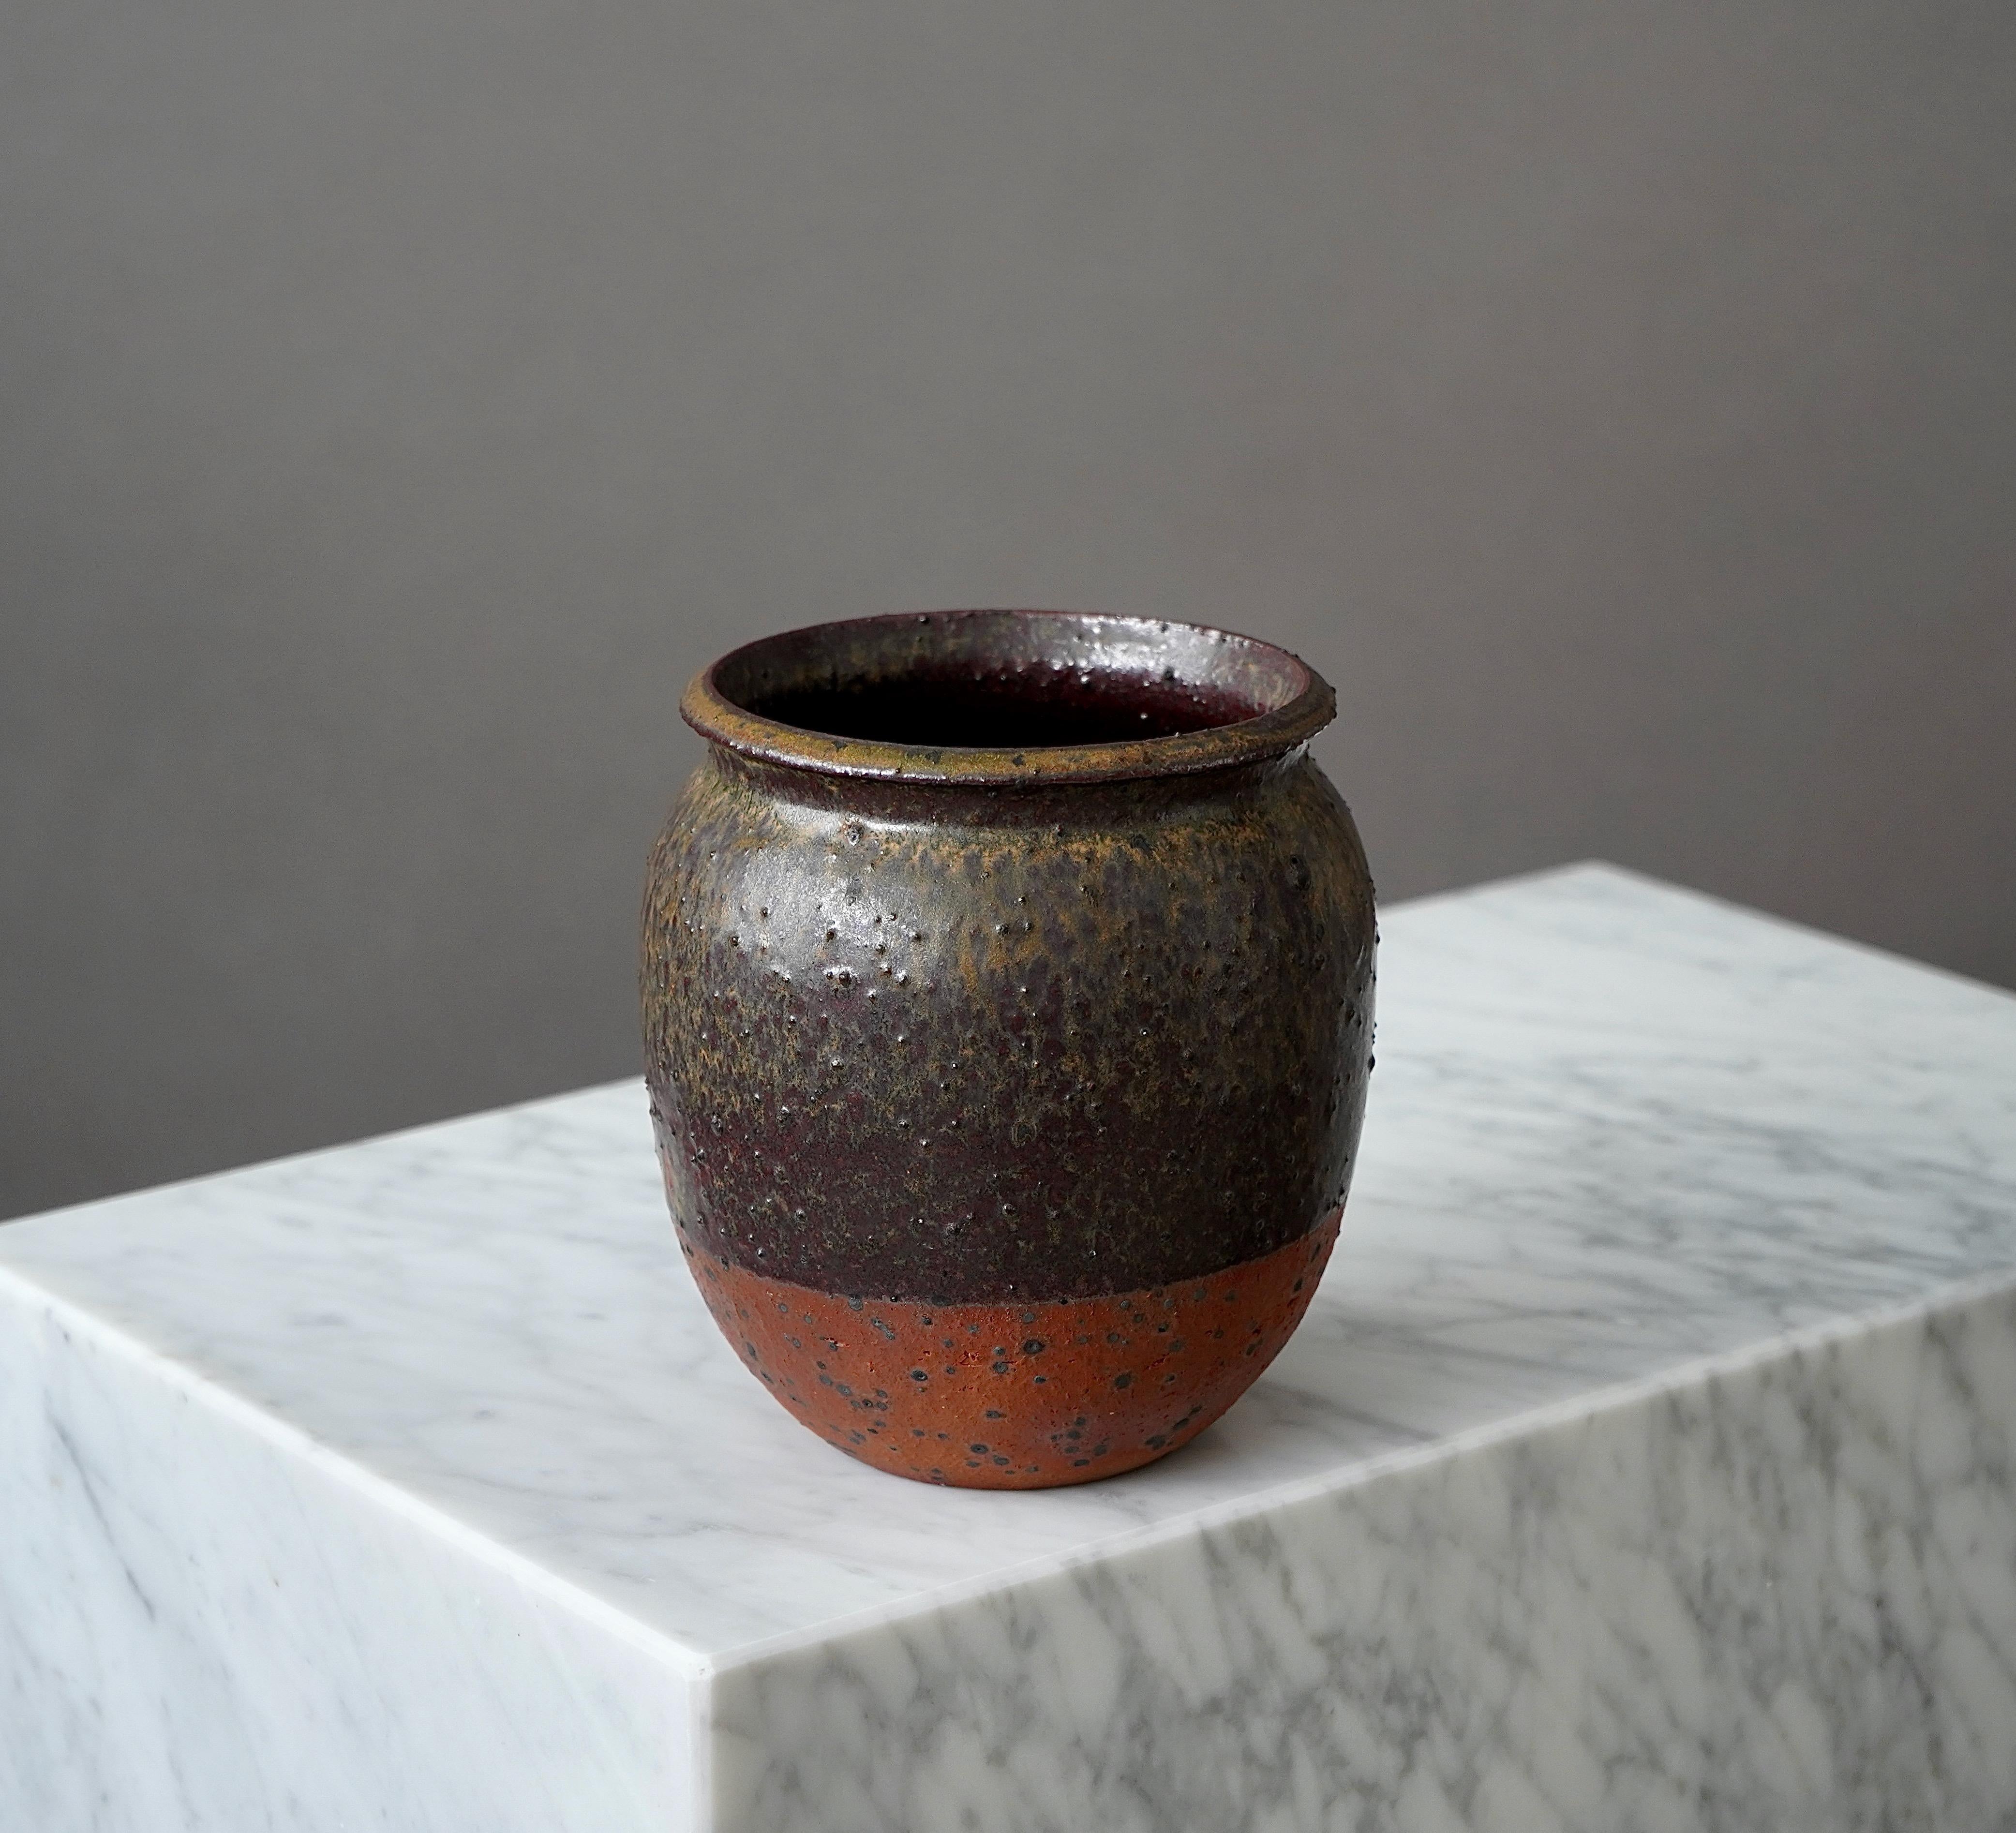 A beautiful and unique stoneware vase with amazing glaze. 
Made by Rolf Palm, in the artist's studio, Mölle, Sweden, 1974.

Great condition. Incised ’Palm / Mölle / G4’.

Rolf Palm (1930–2018) was one of Sweden’s leading ceramic artists in the 20th